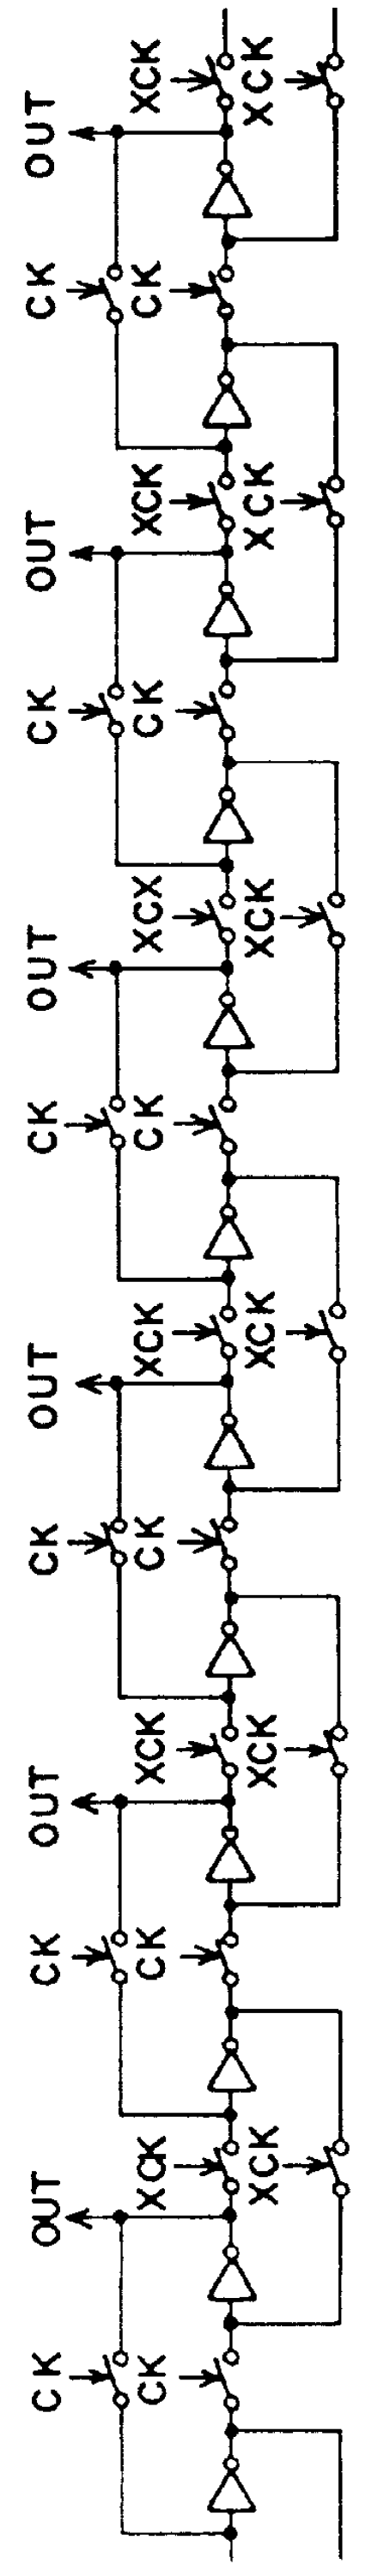 Chain-connected shift register and programmable logic circuit whose logic function is changeable in real time